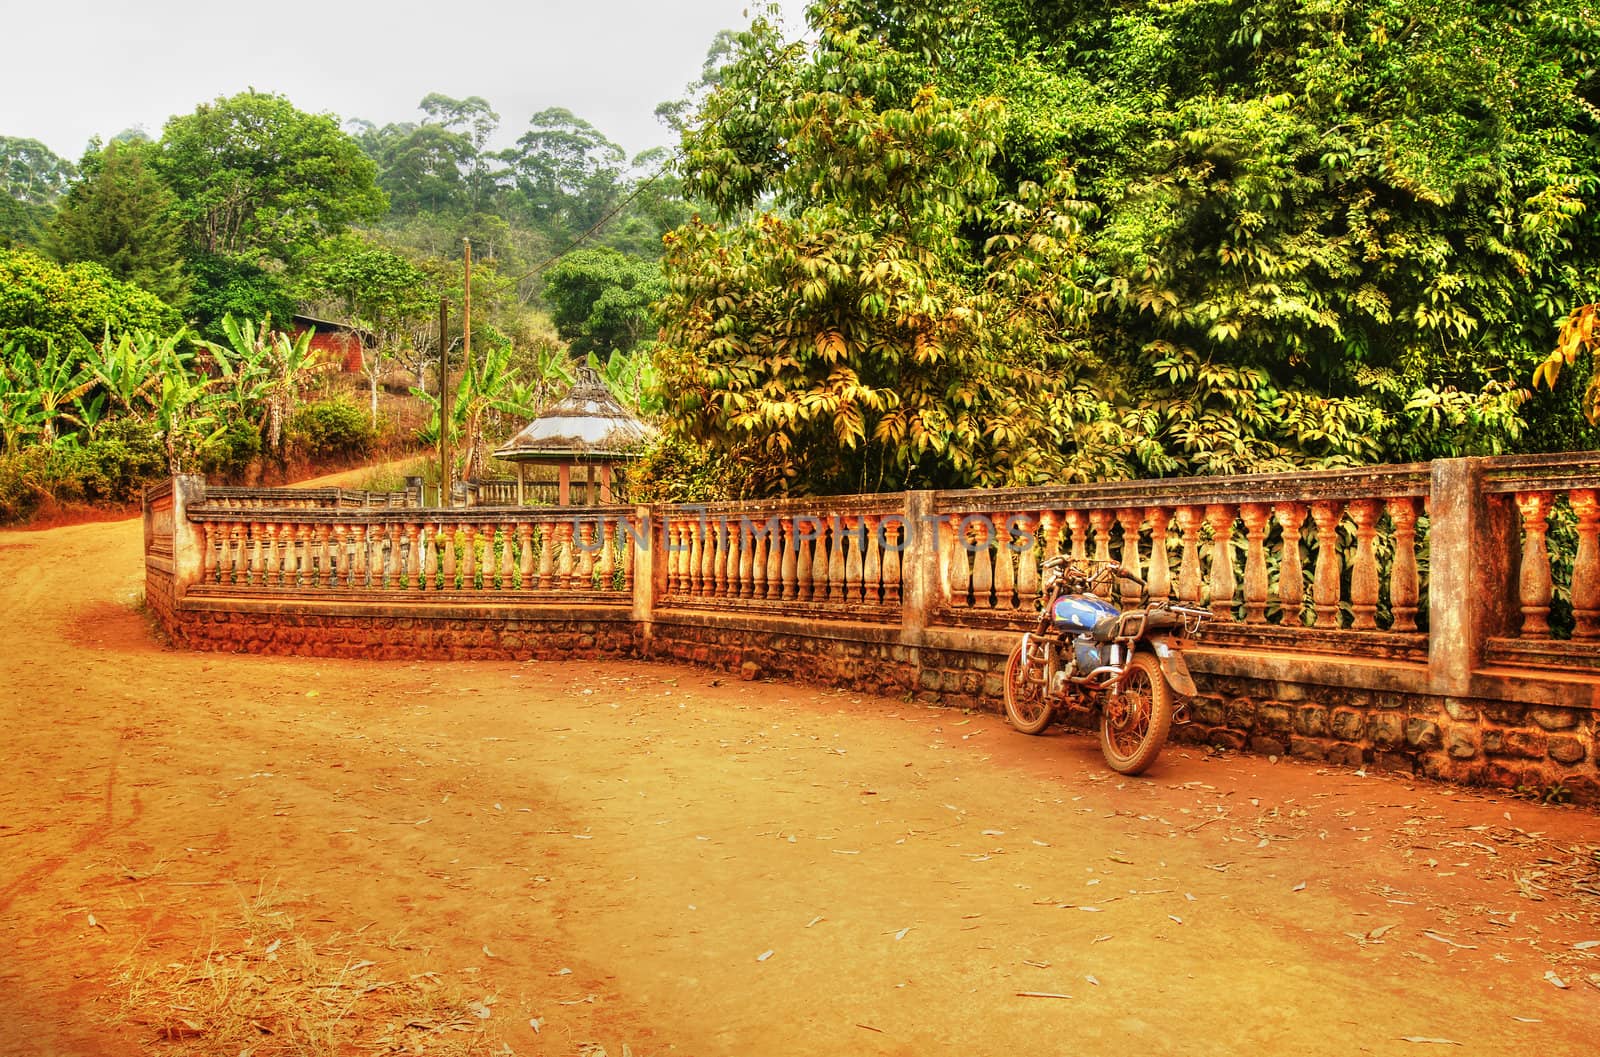 Old motorcycle against fence, African dirt road landscape